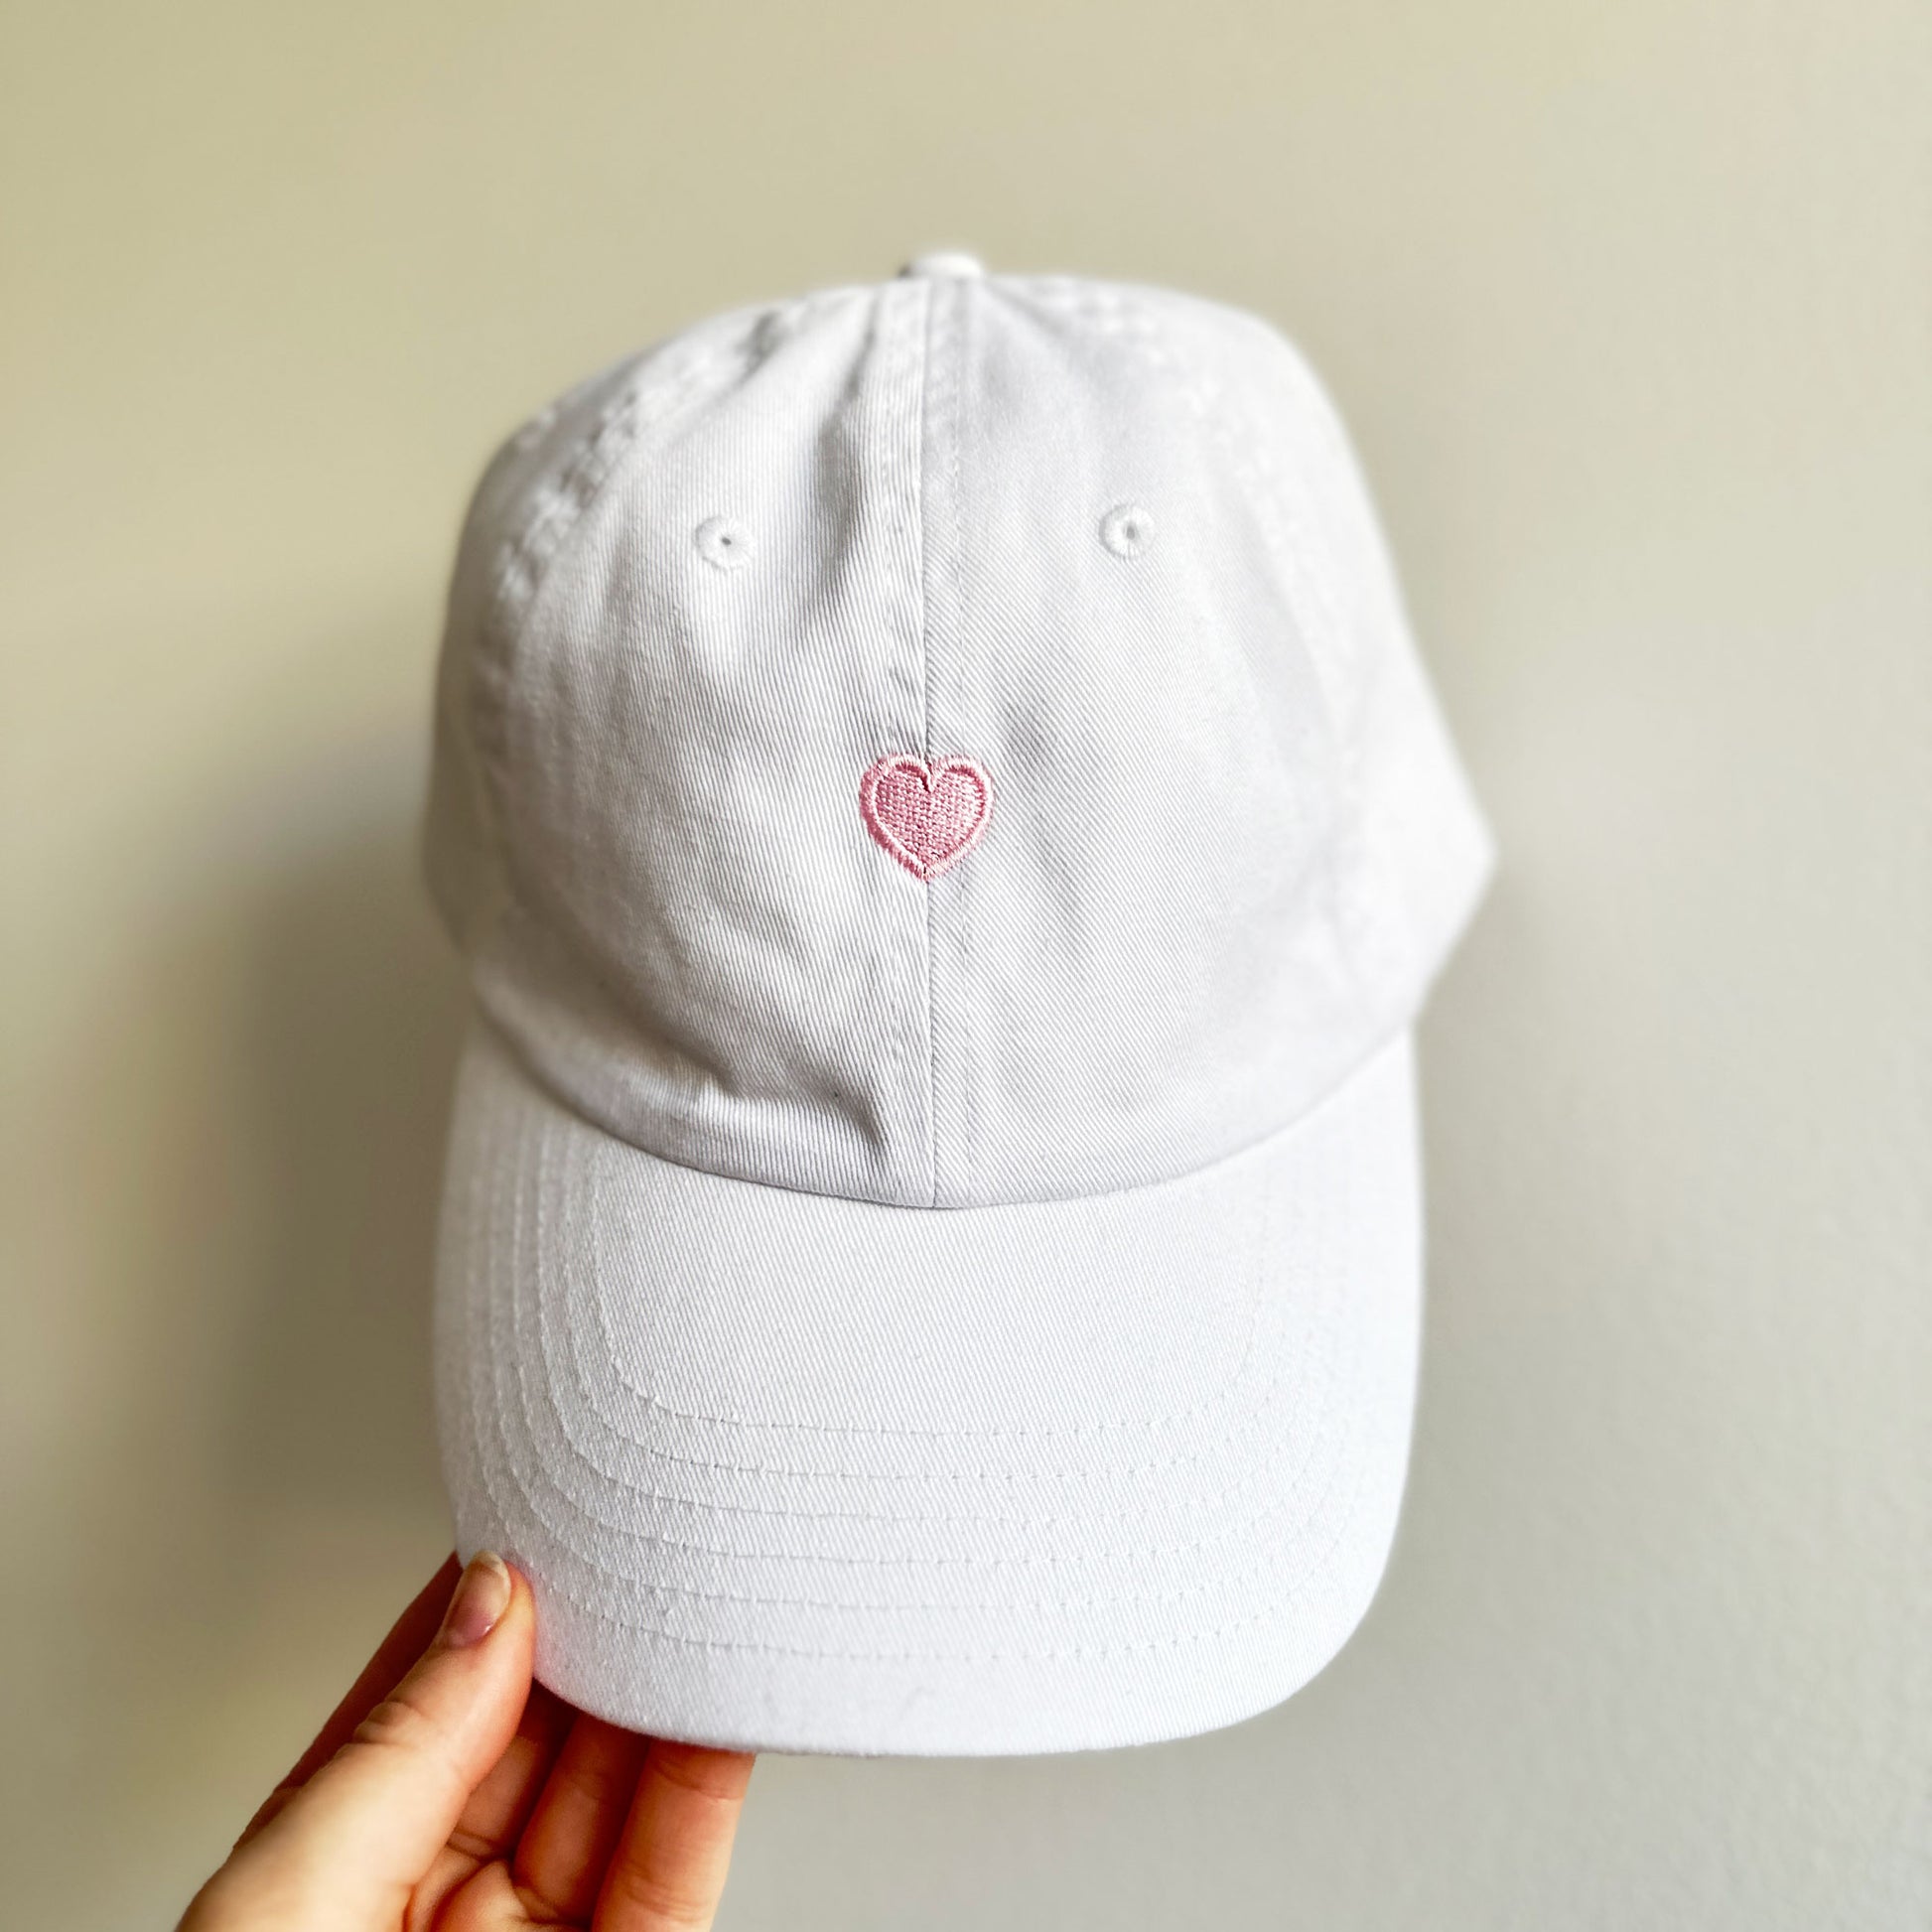 white baseball cap with small baby pink embroidered heart design